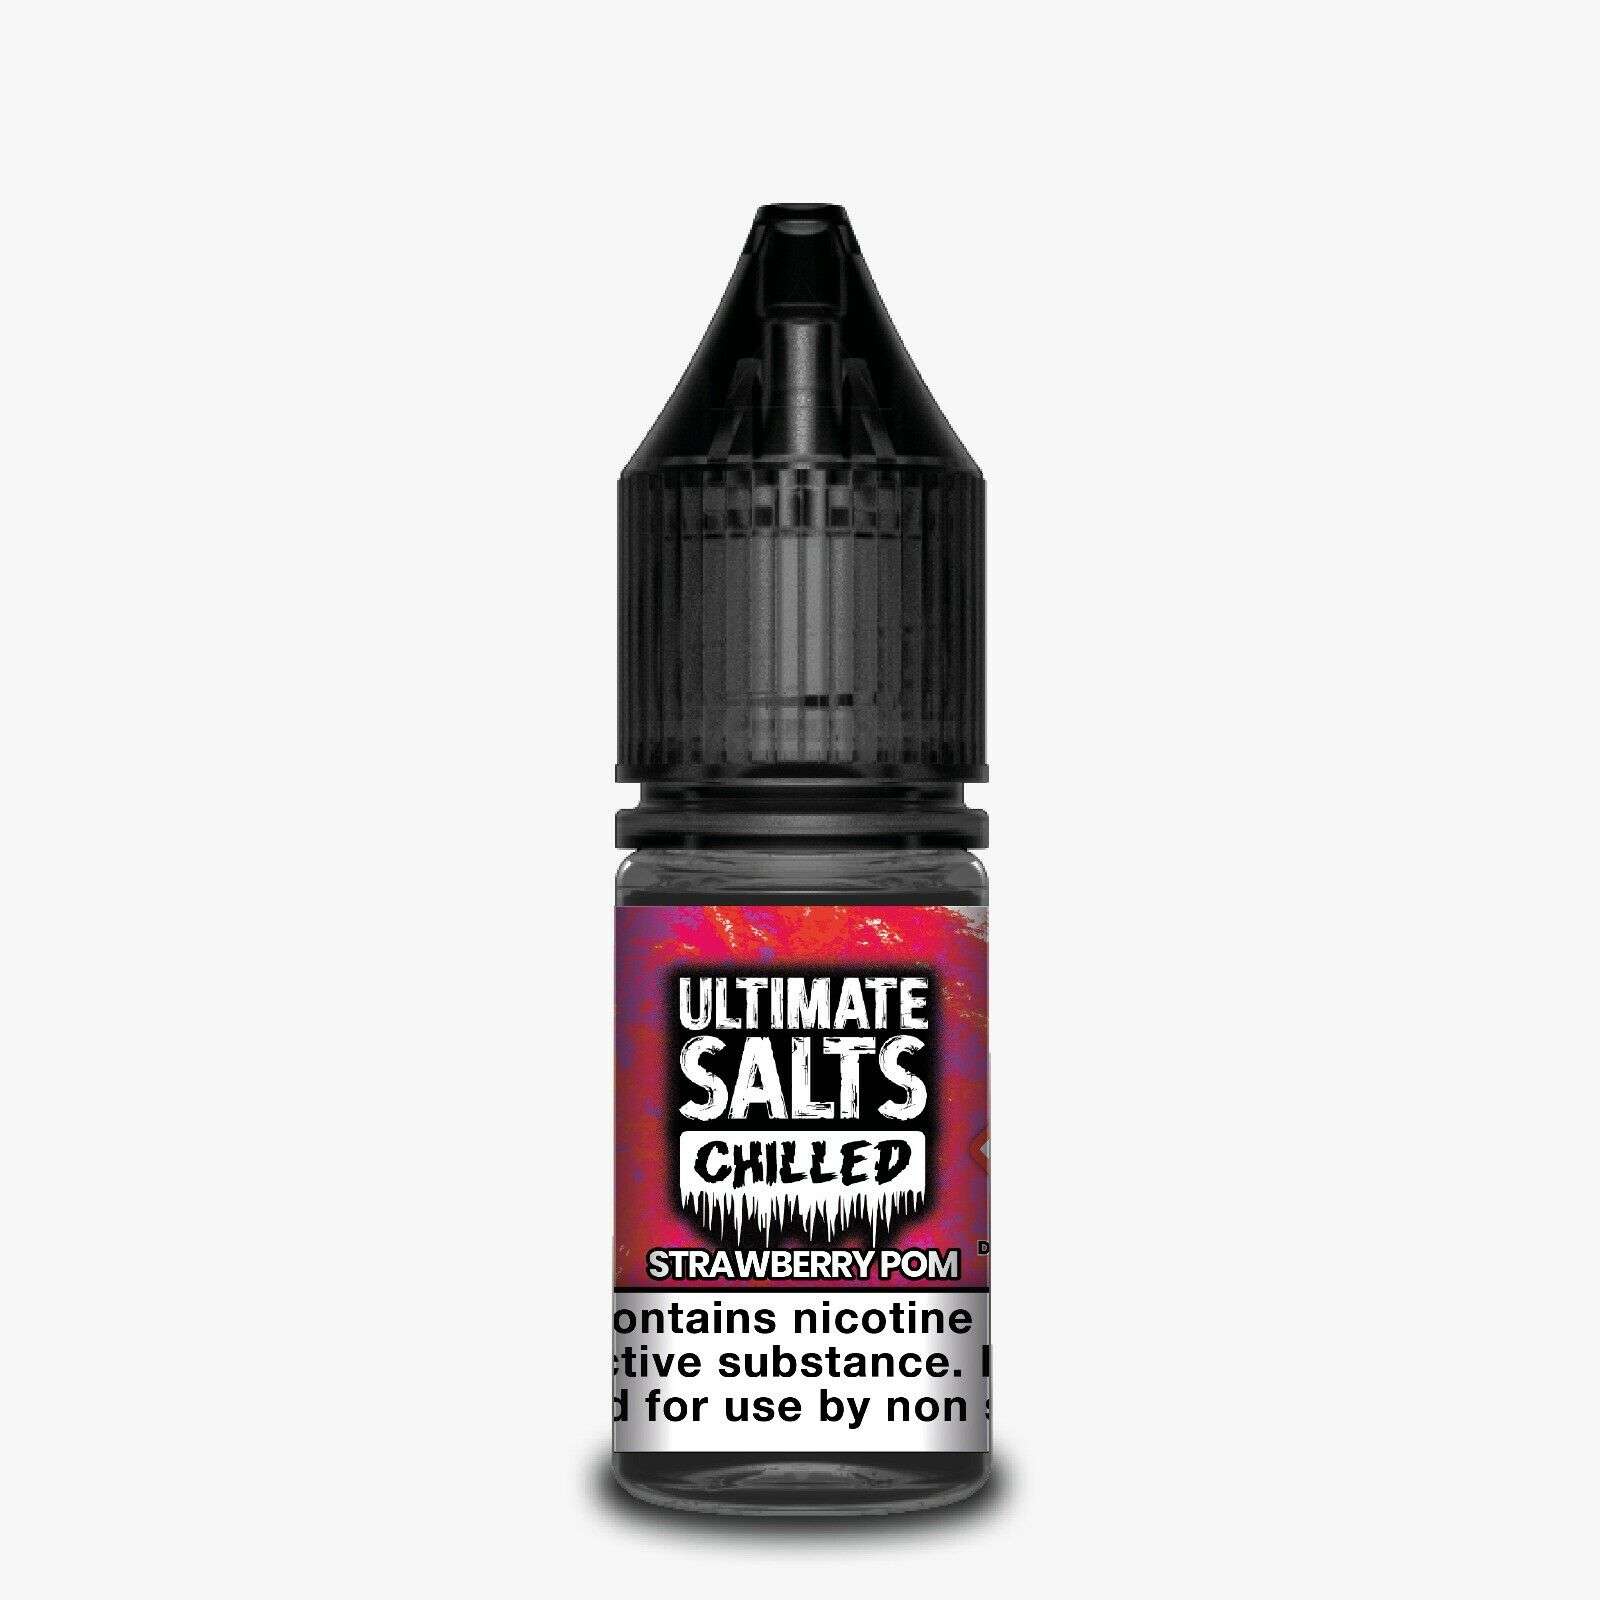  Strawberry Pom Chilled Nic Salt E-Liquid by Ultimate Puff 10ml 